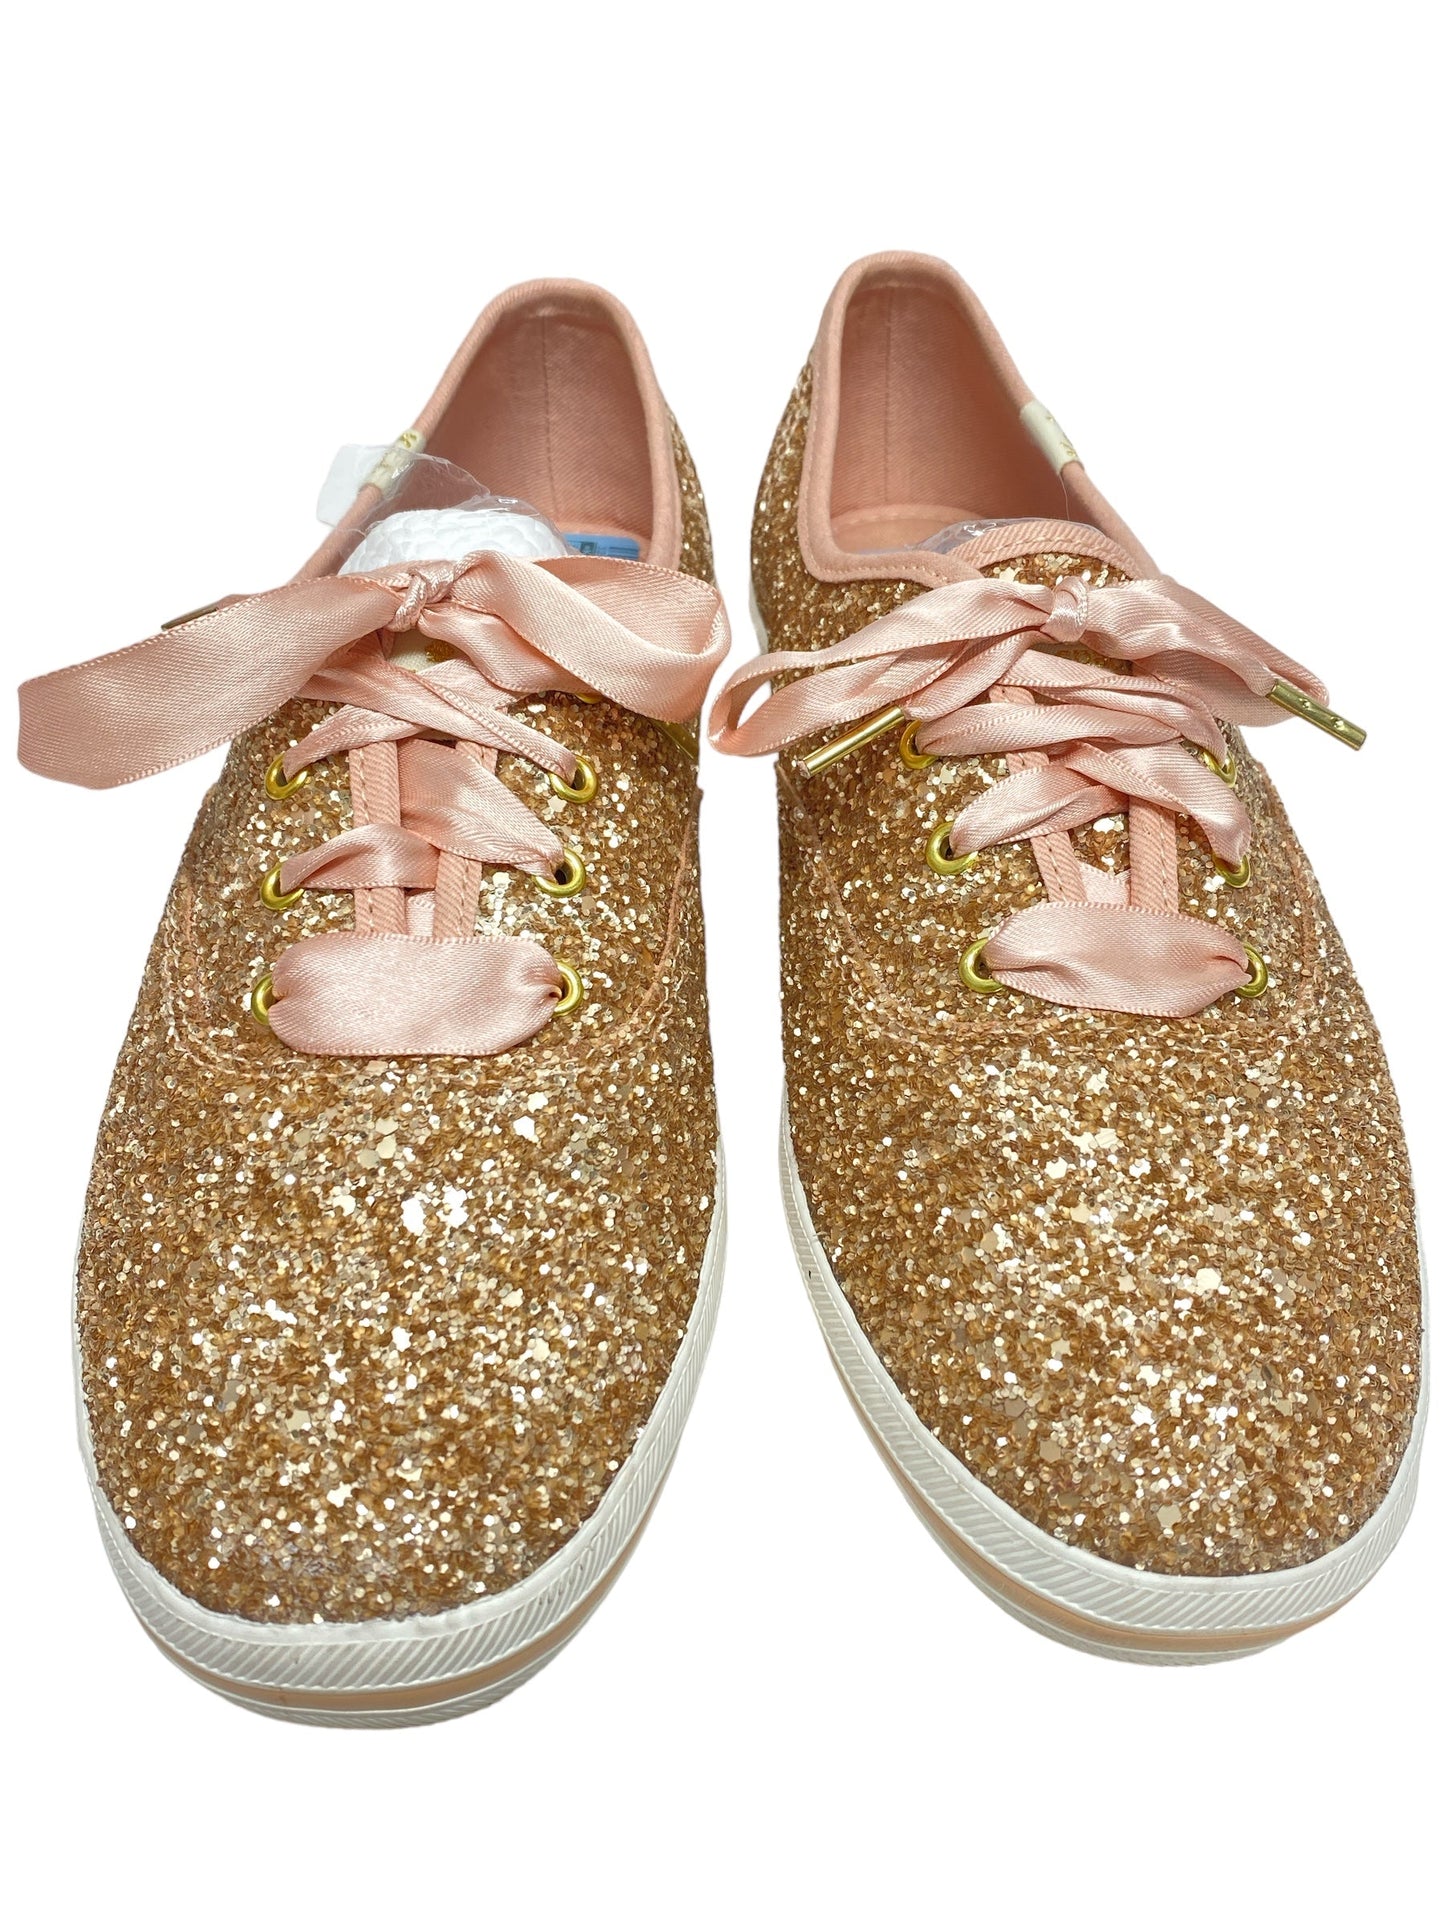 Shoes Sneakers By Kate Spade  Size: 7